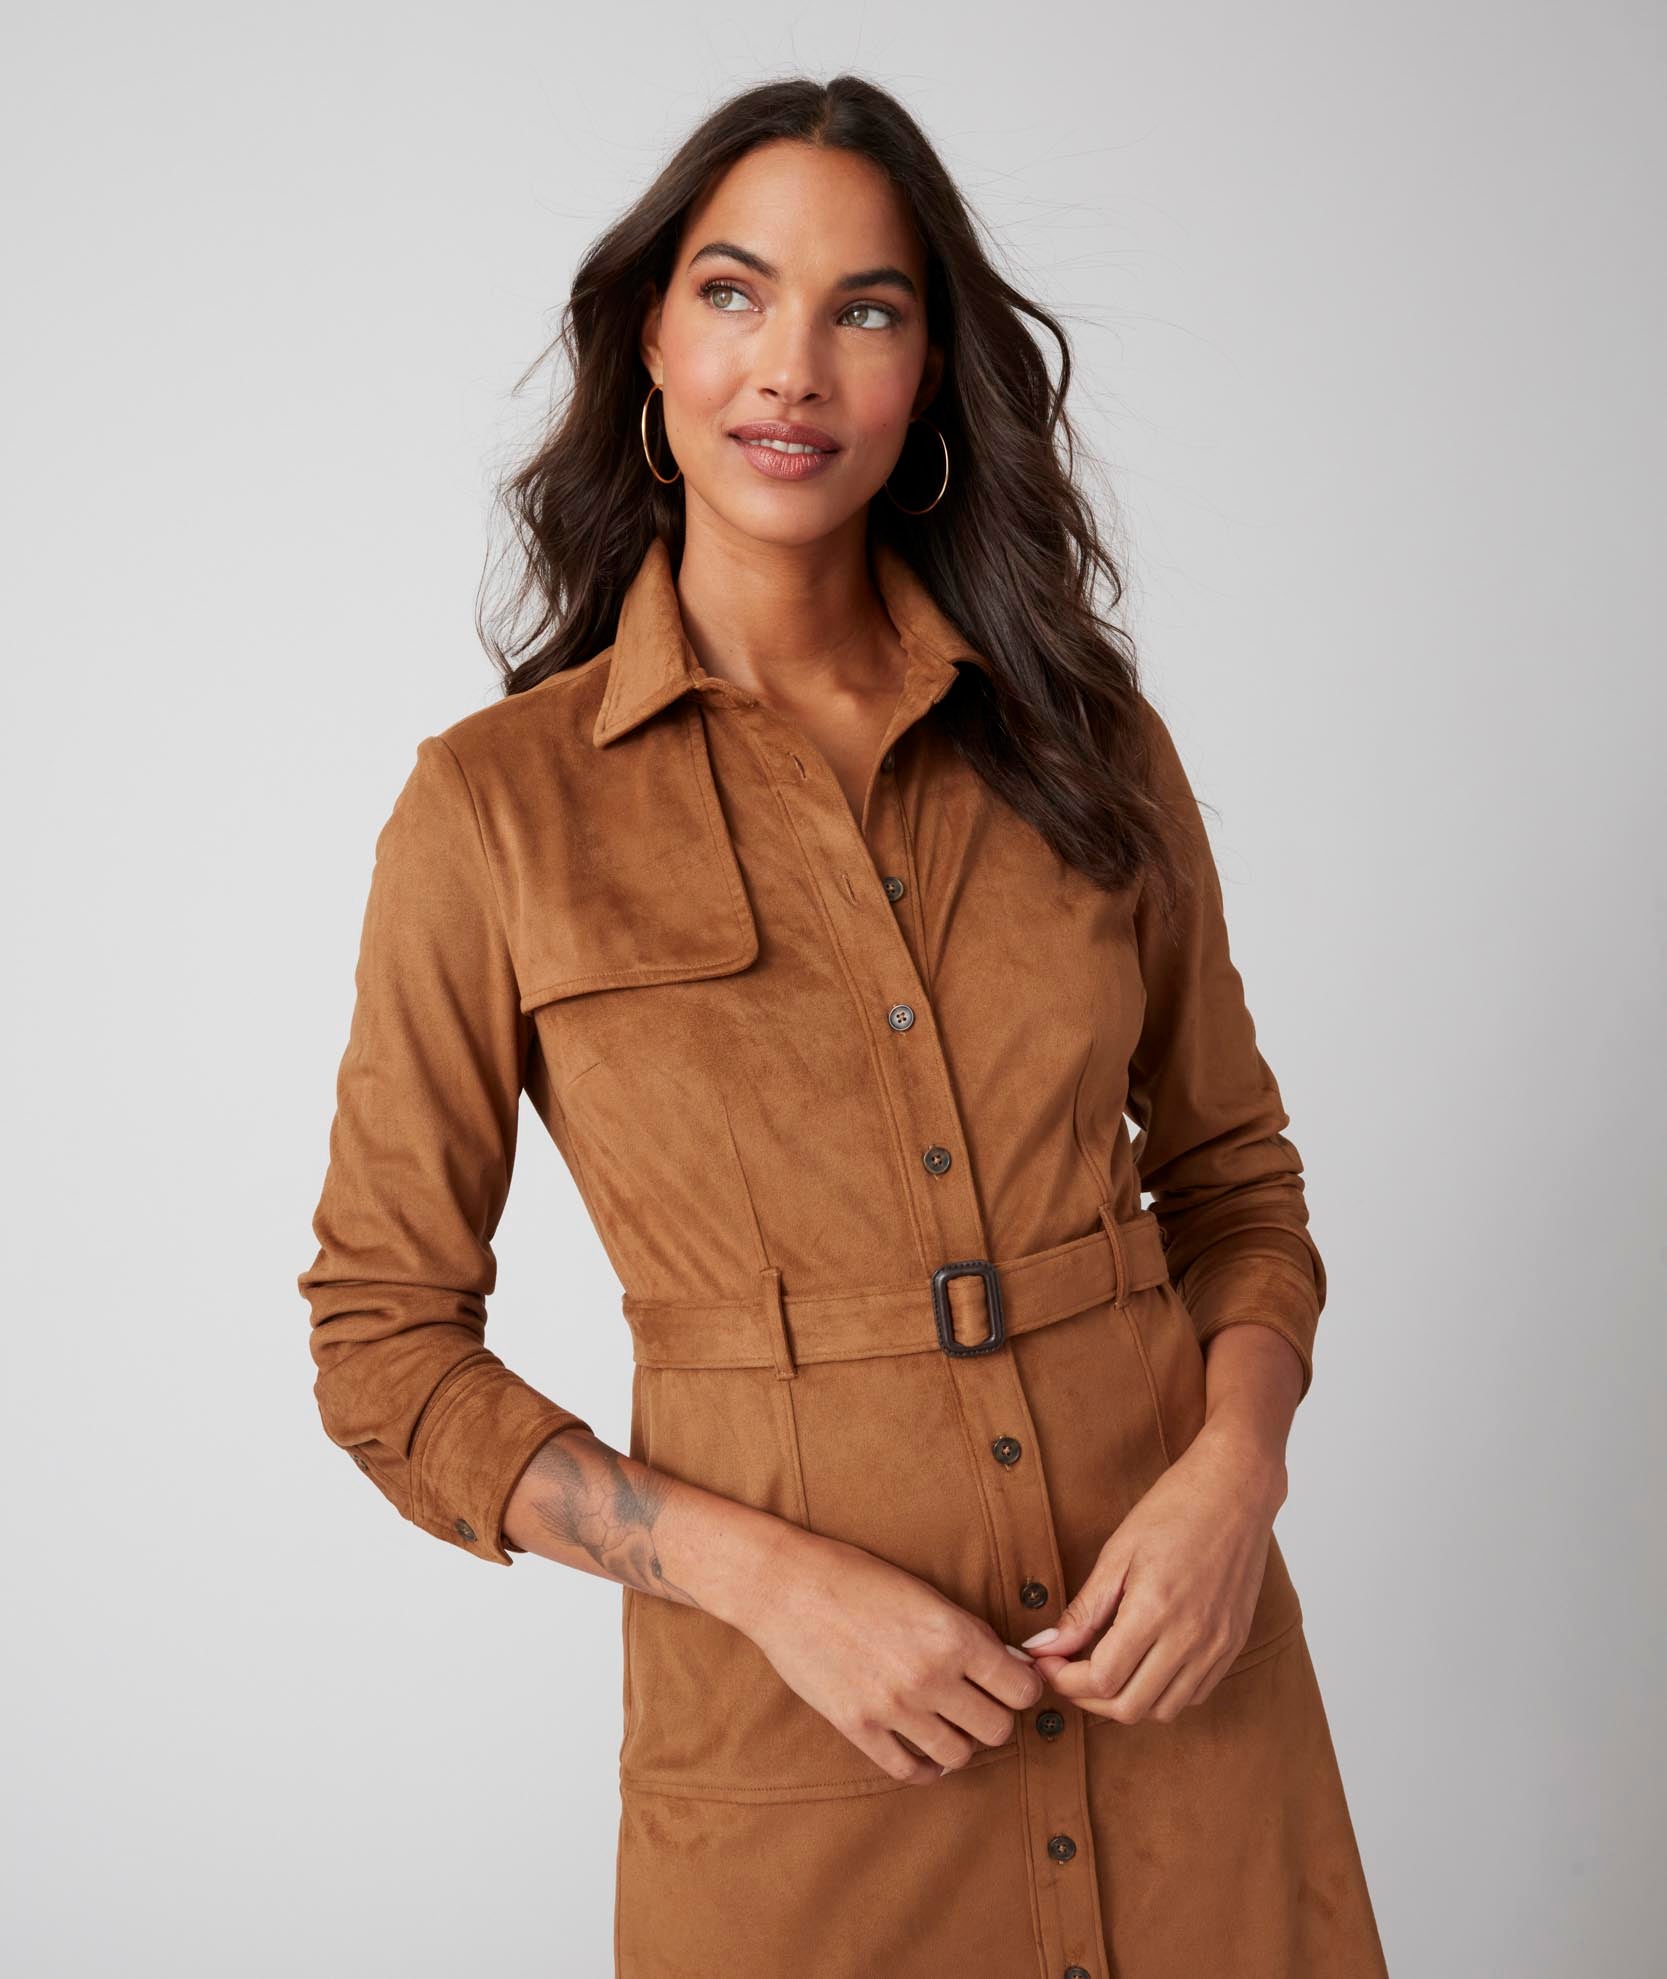 Faux Suede Belted Shirtdress